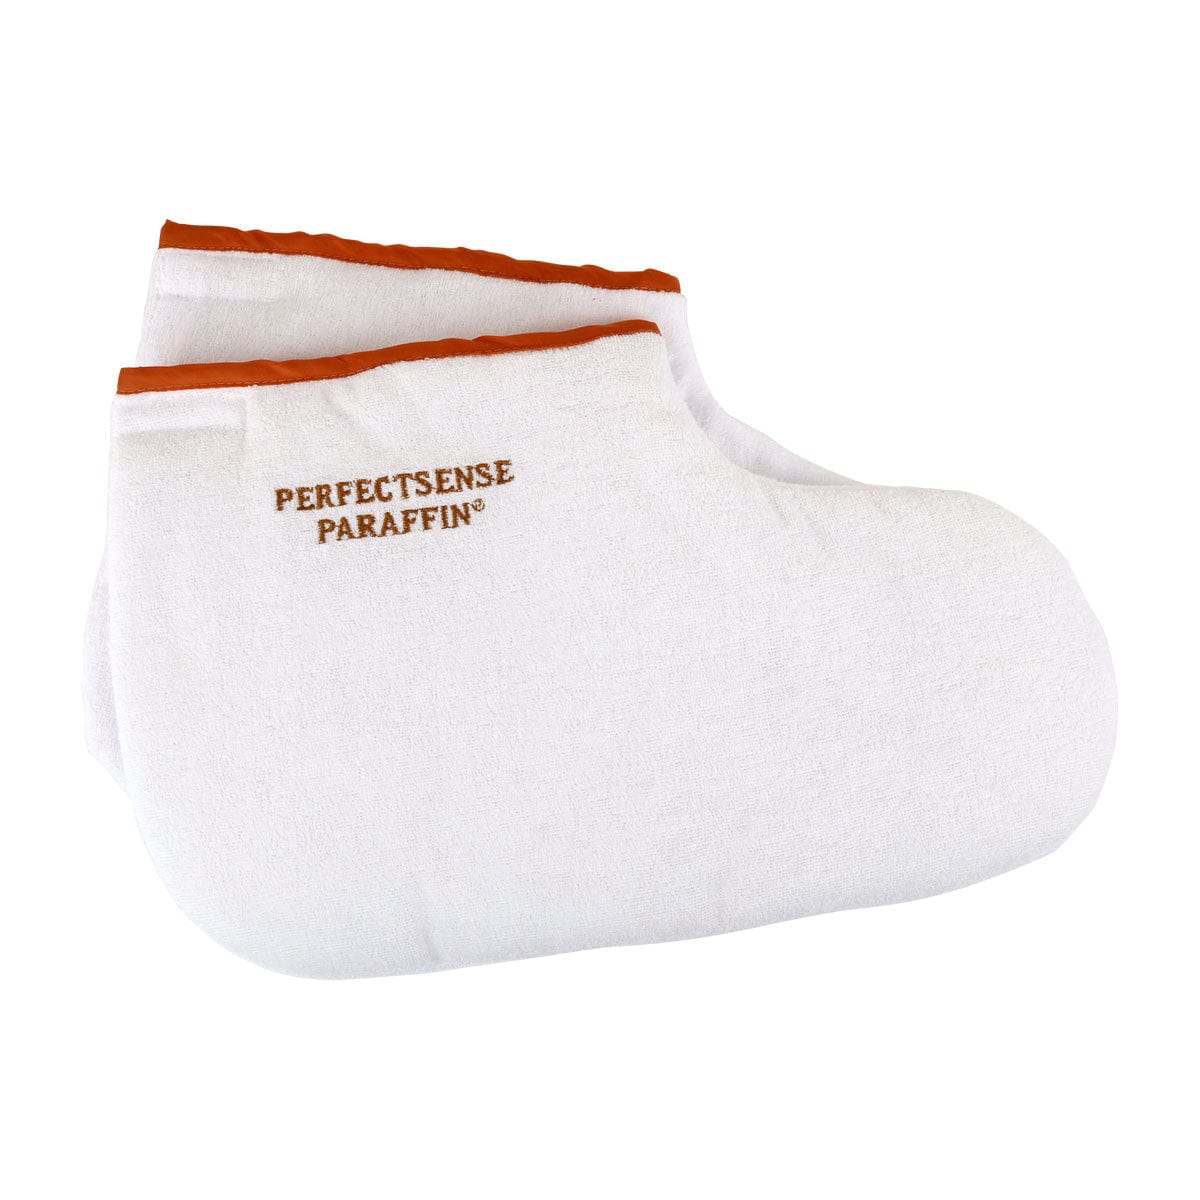 PerfectSense Paraffin Feet Over Booties (Pair)